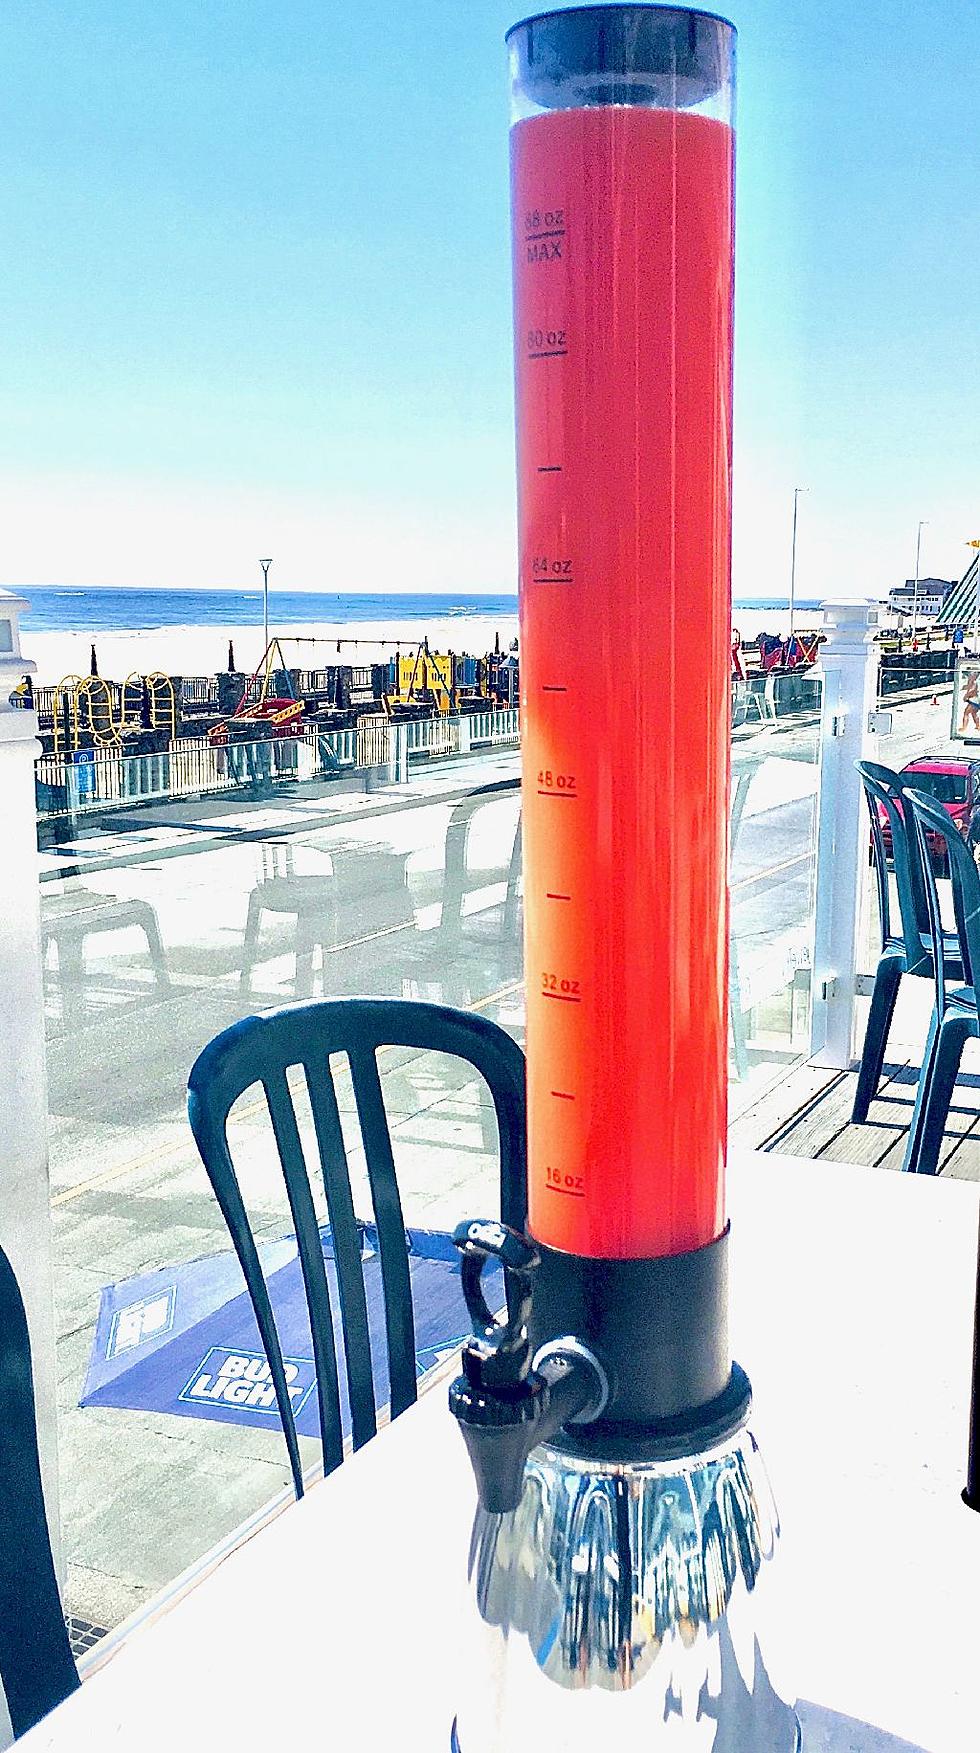 Where Can You Get This Delicious Rum Tower on Hampton Beach New Hampshire?